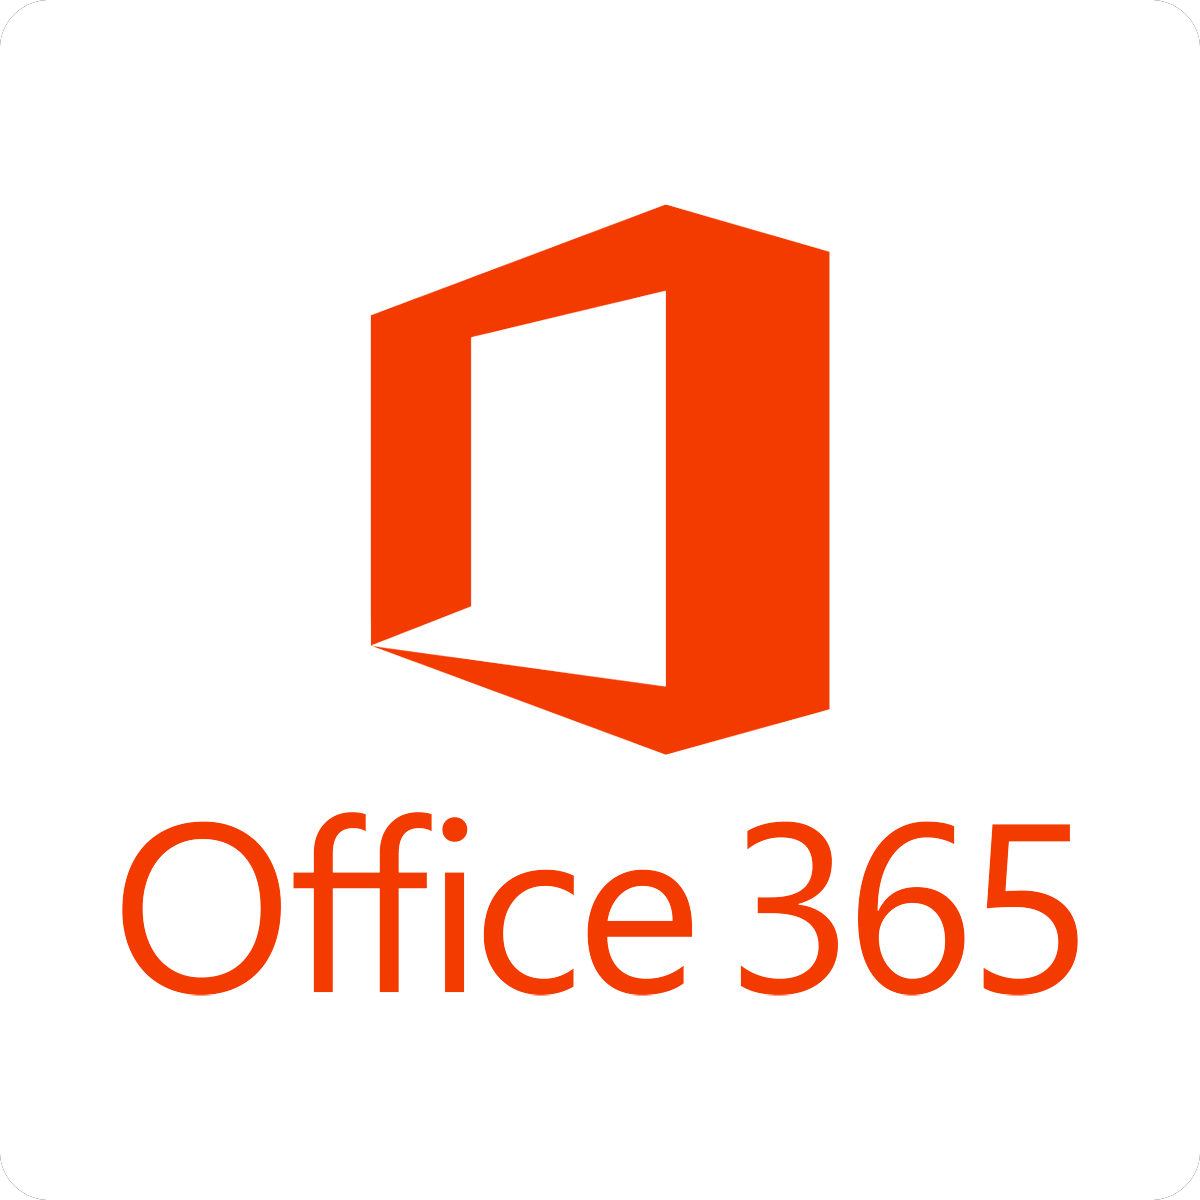 Microsoft Office 365 Logo - Which option of Microsoft Office 365 is for you?